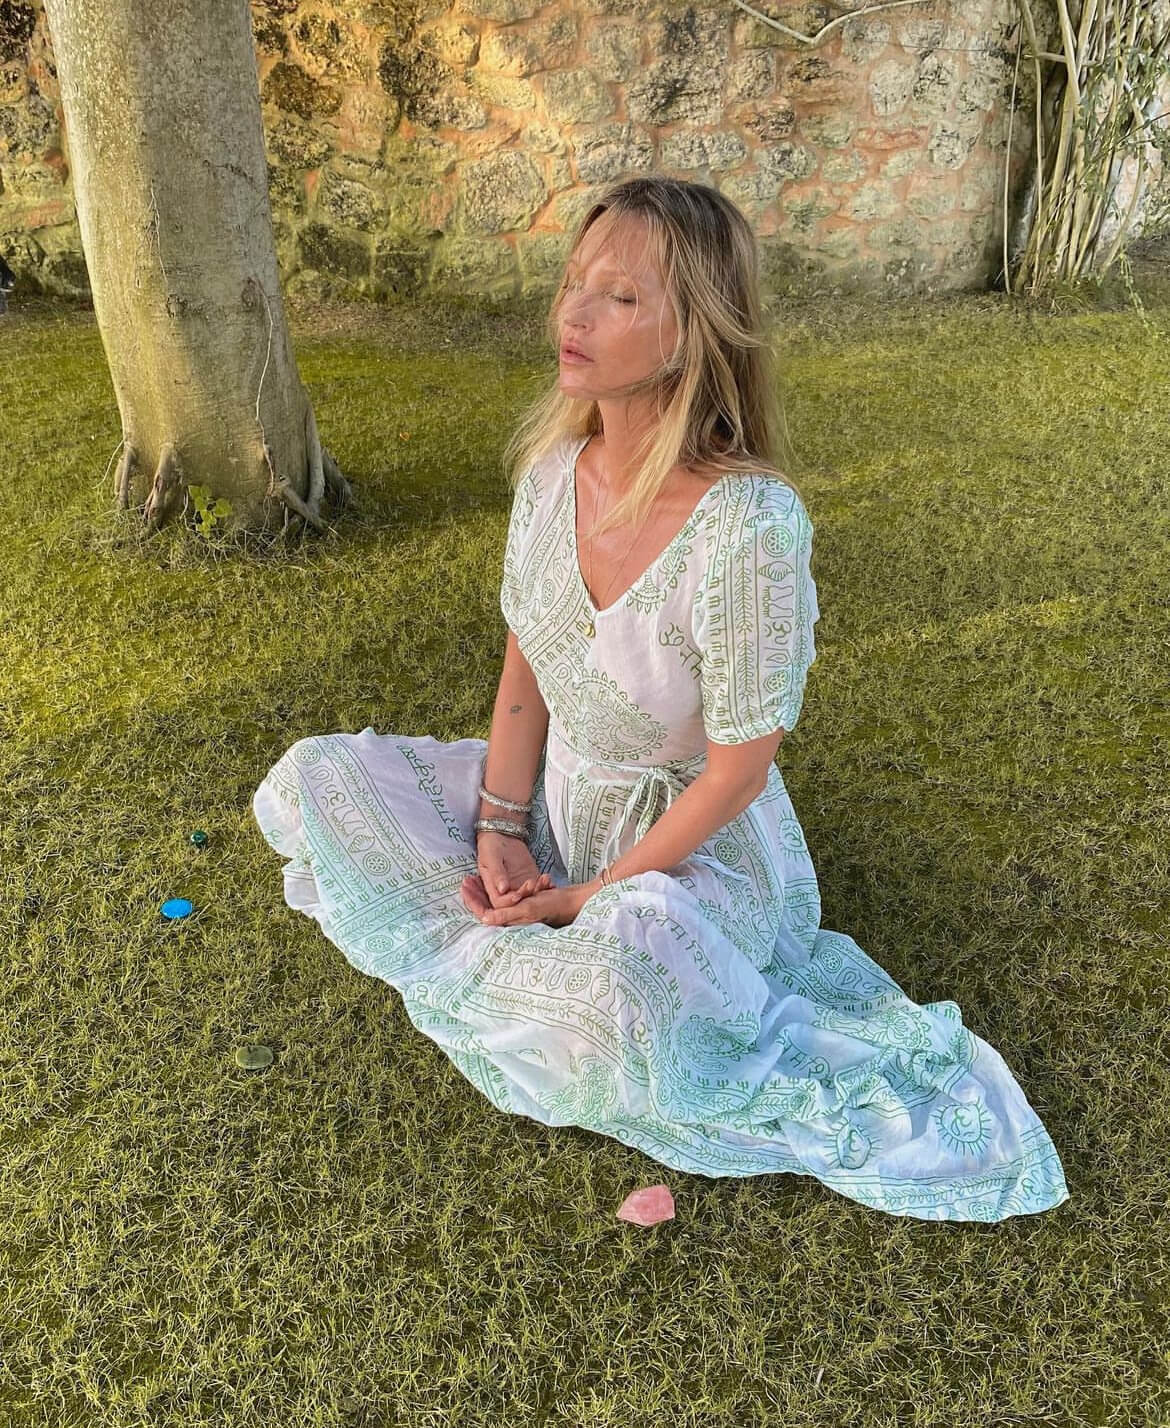 Remember, as Kate Moss shares on her skincare and wellness Instagram account, Cosmoss, "As another year ends, take time for yourself and rebalance." 